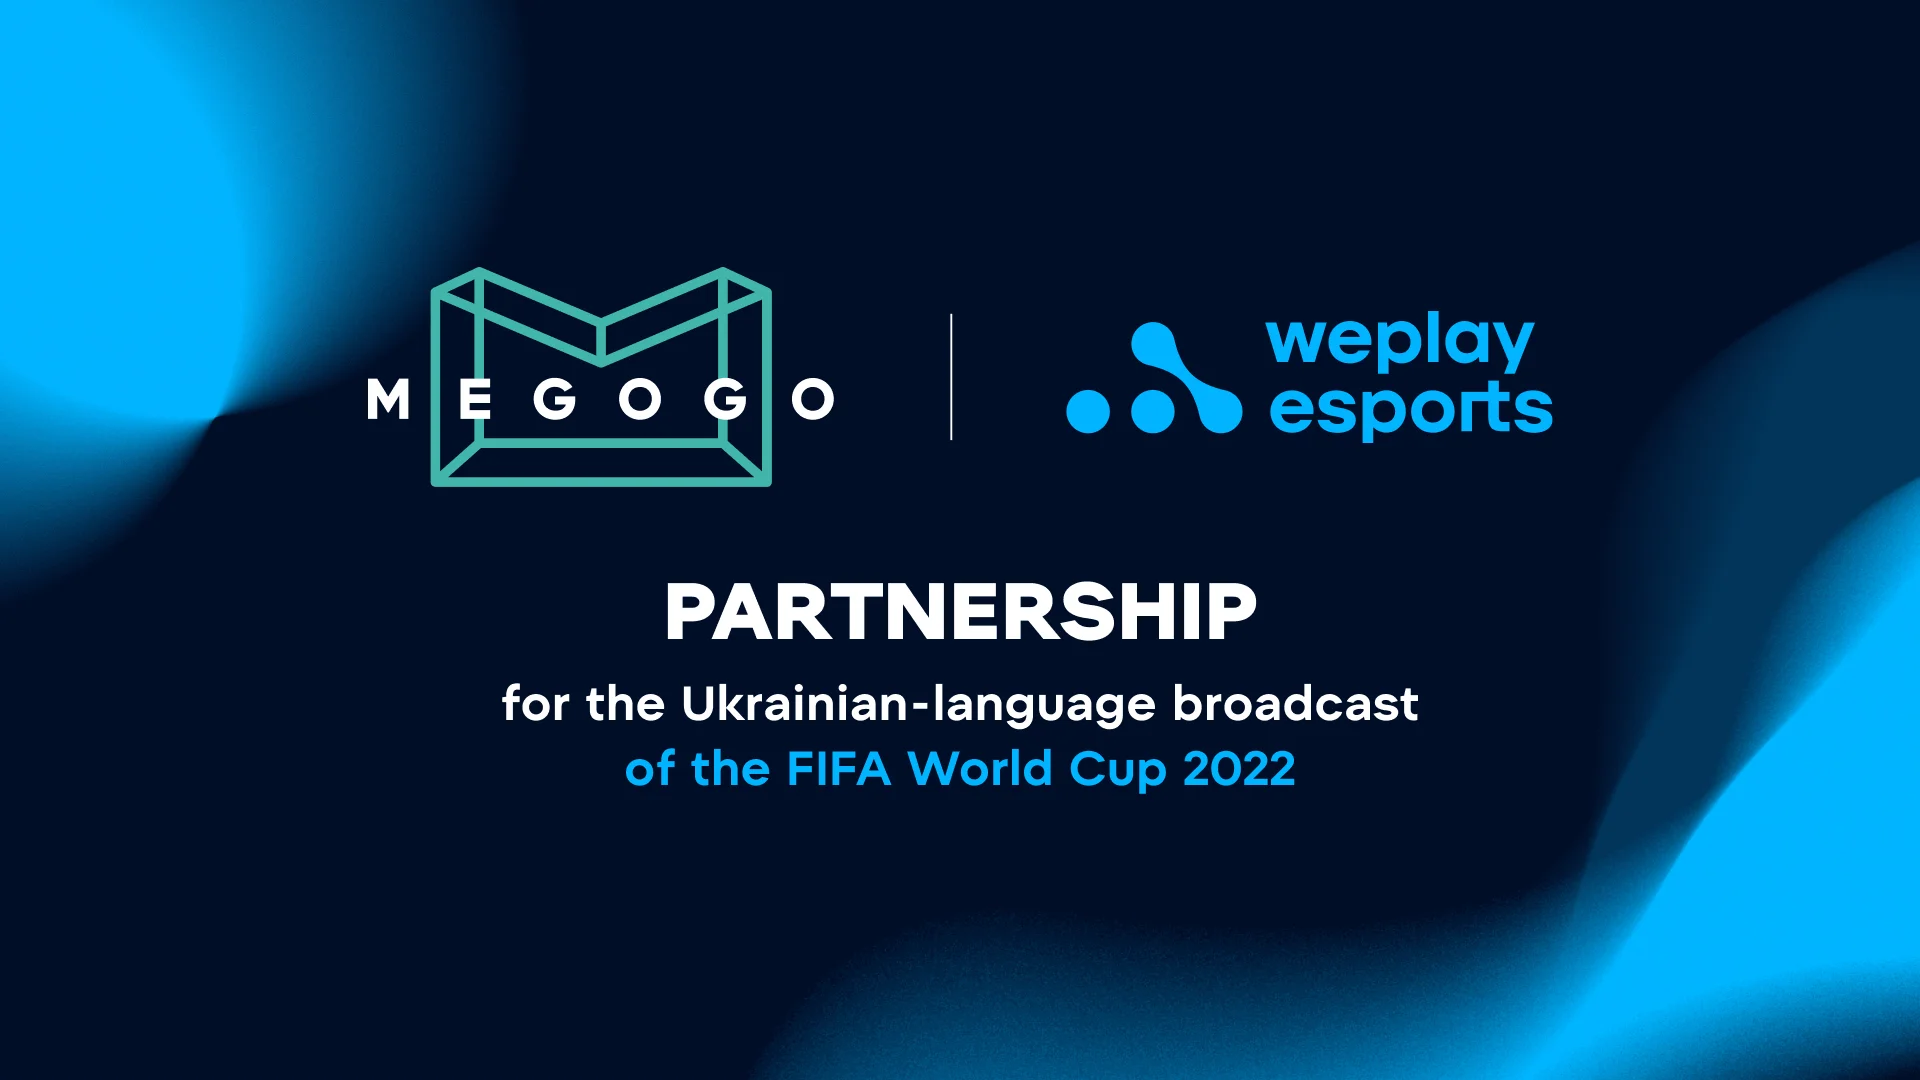 WePlay Esports has become an official production partner of the Ukrainian-language broadcast of the FIFA World Cup 2022